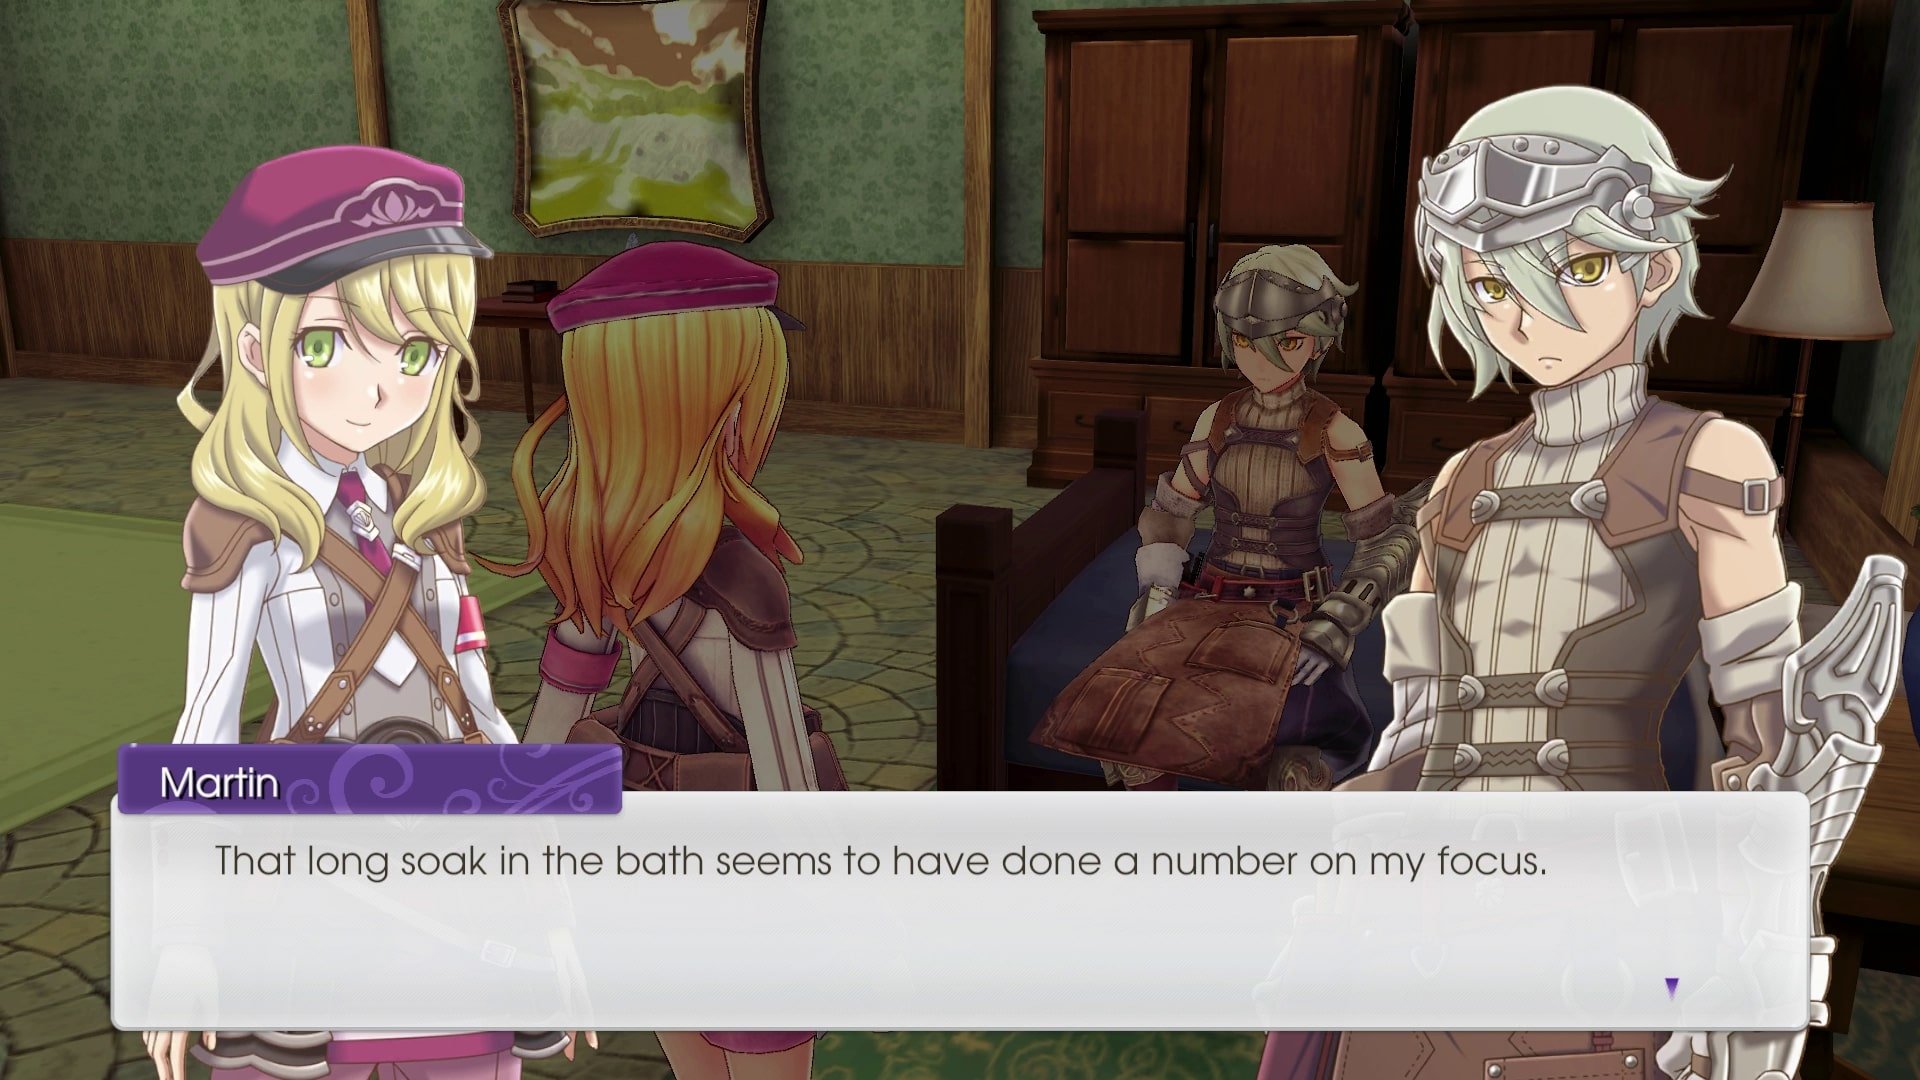 Talking to Martin in Rune Factory 5